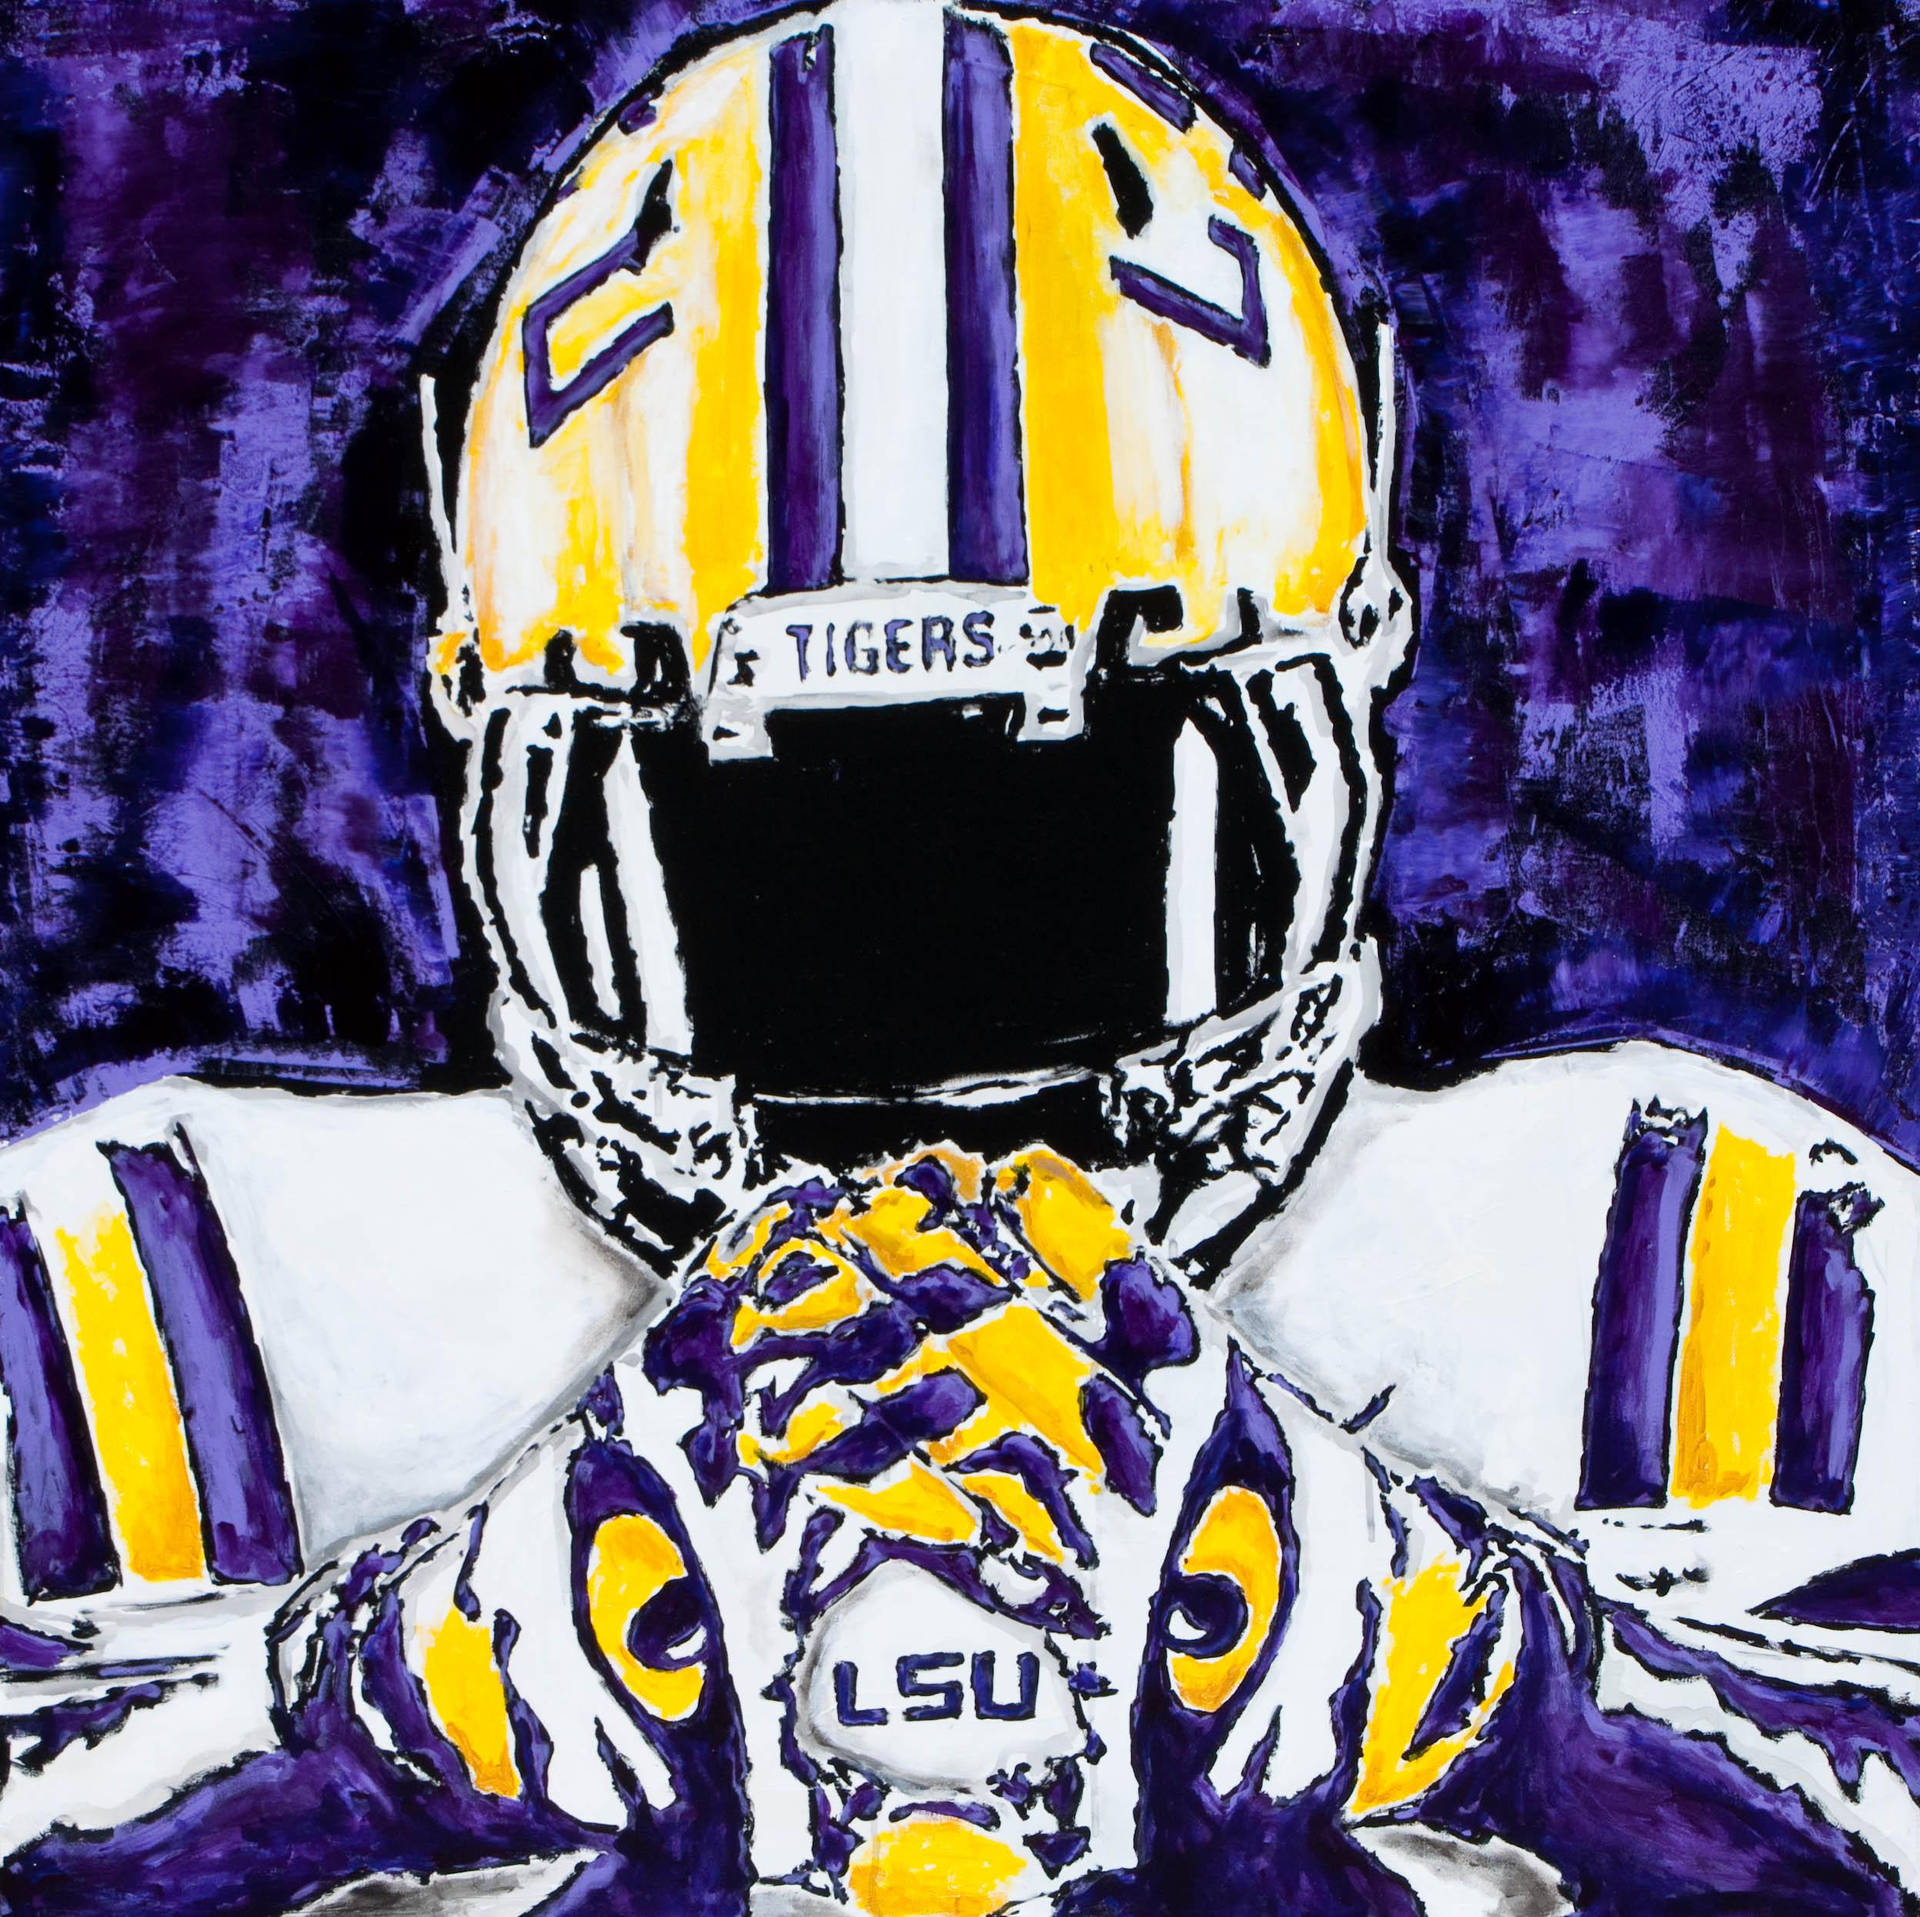 A Painting Of A Lsu Football Player Wallpaper